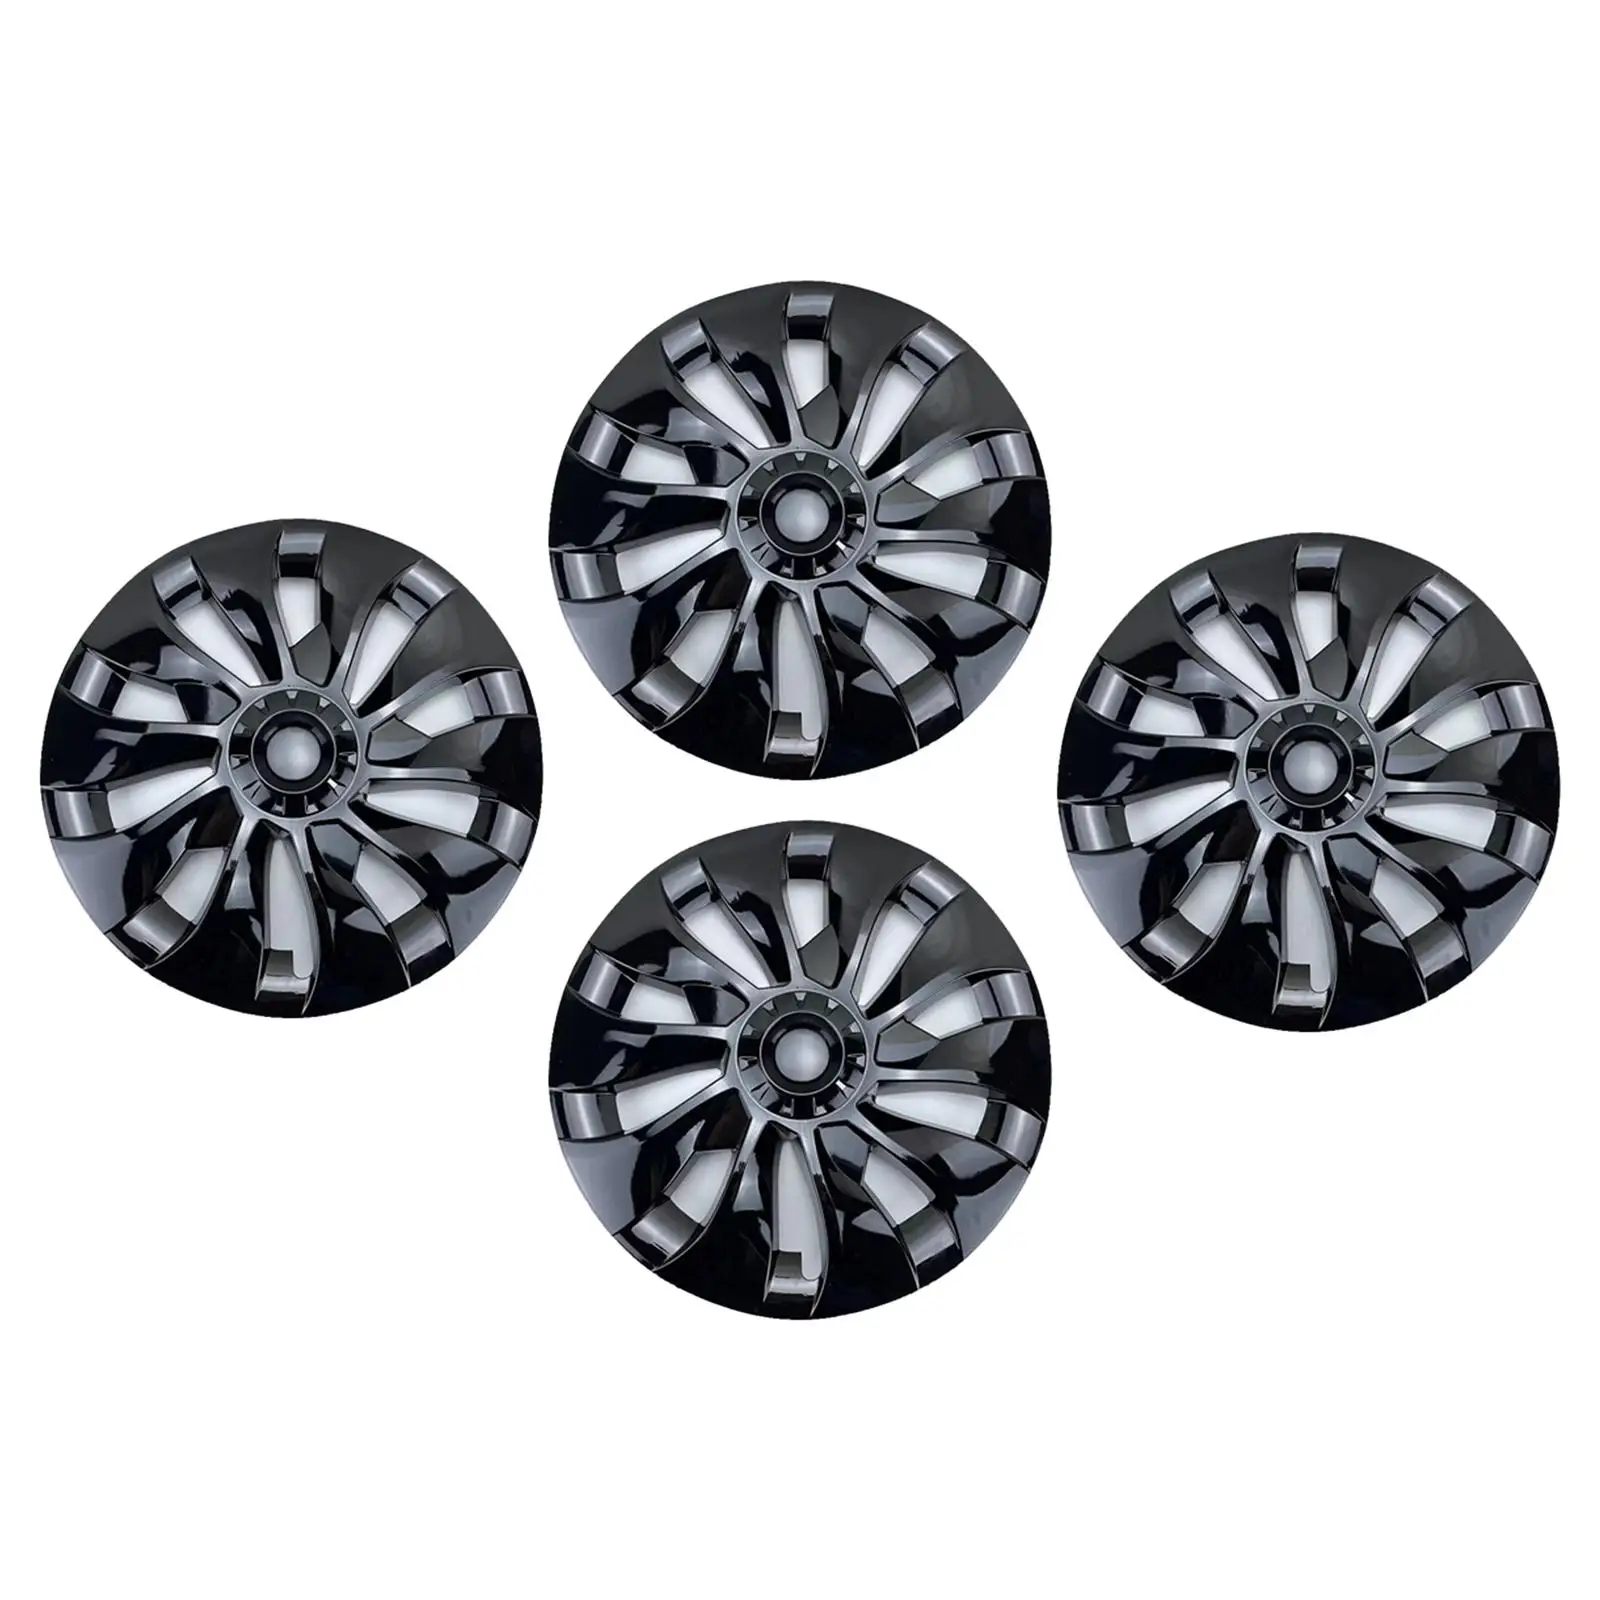 4 Pieces 18 inch Hub Cap Replacement Wheel Cap Cover Automobile Durable Full Rim Cover Replacement Hubcap for Tesla Model 3